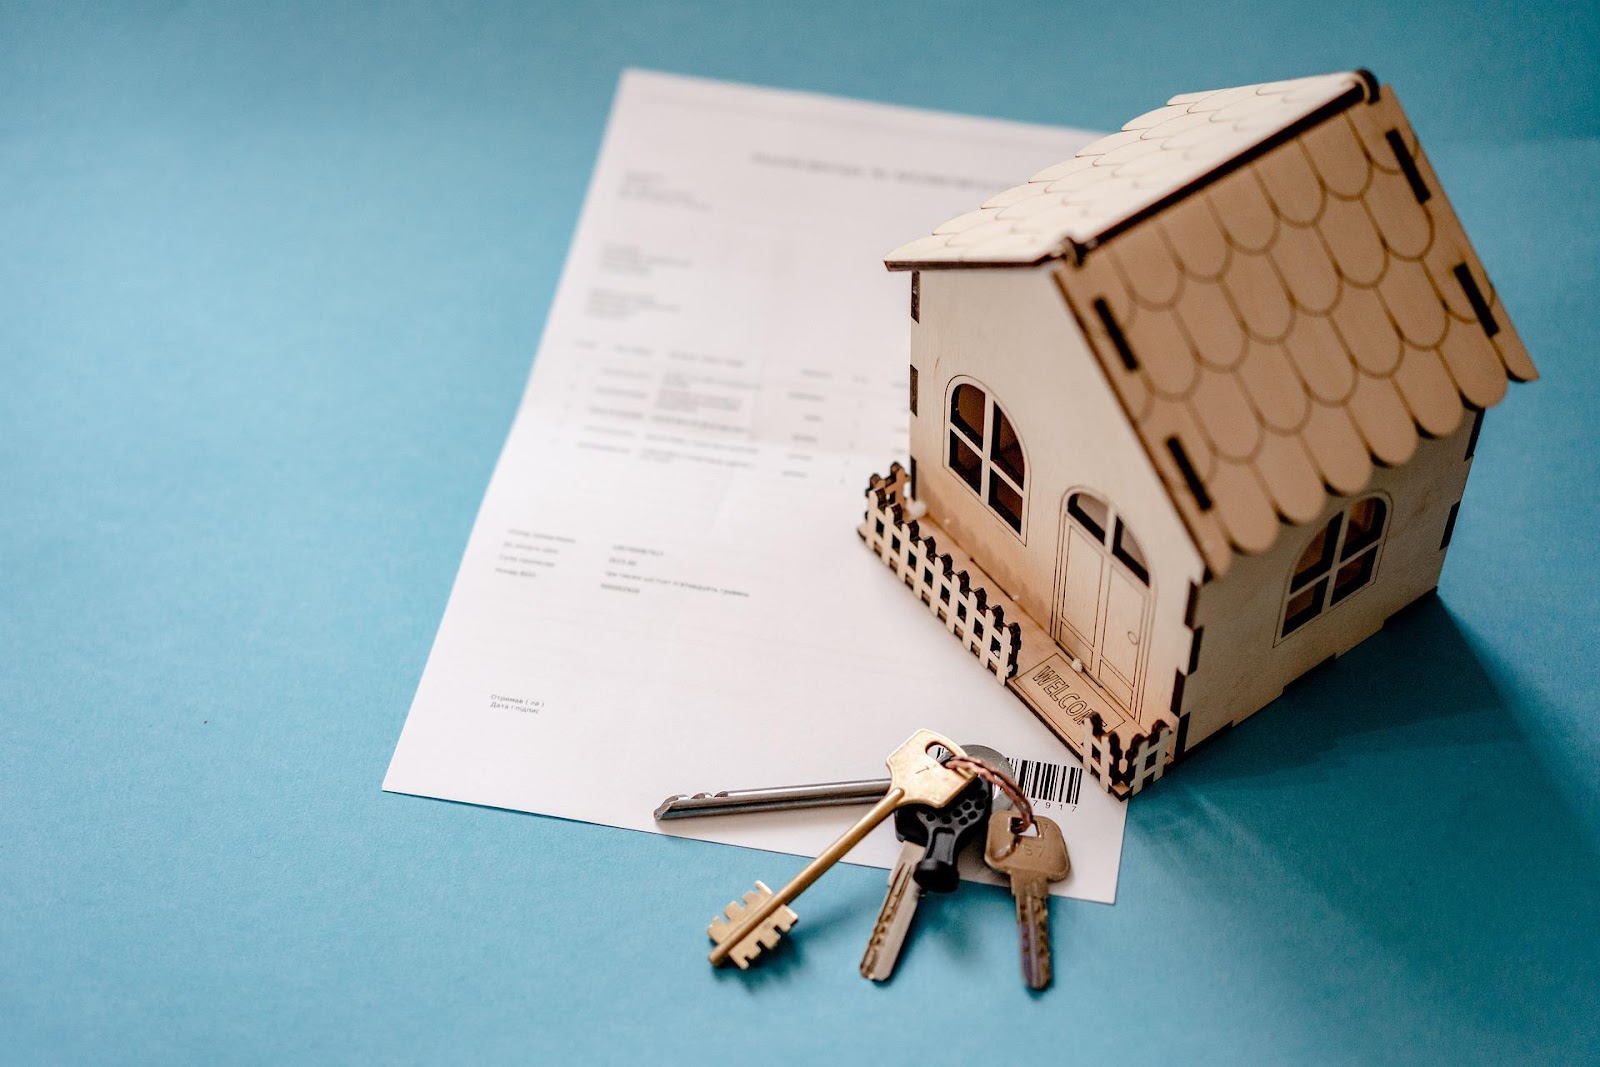 Mortgage application process for a house on sale